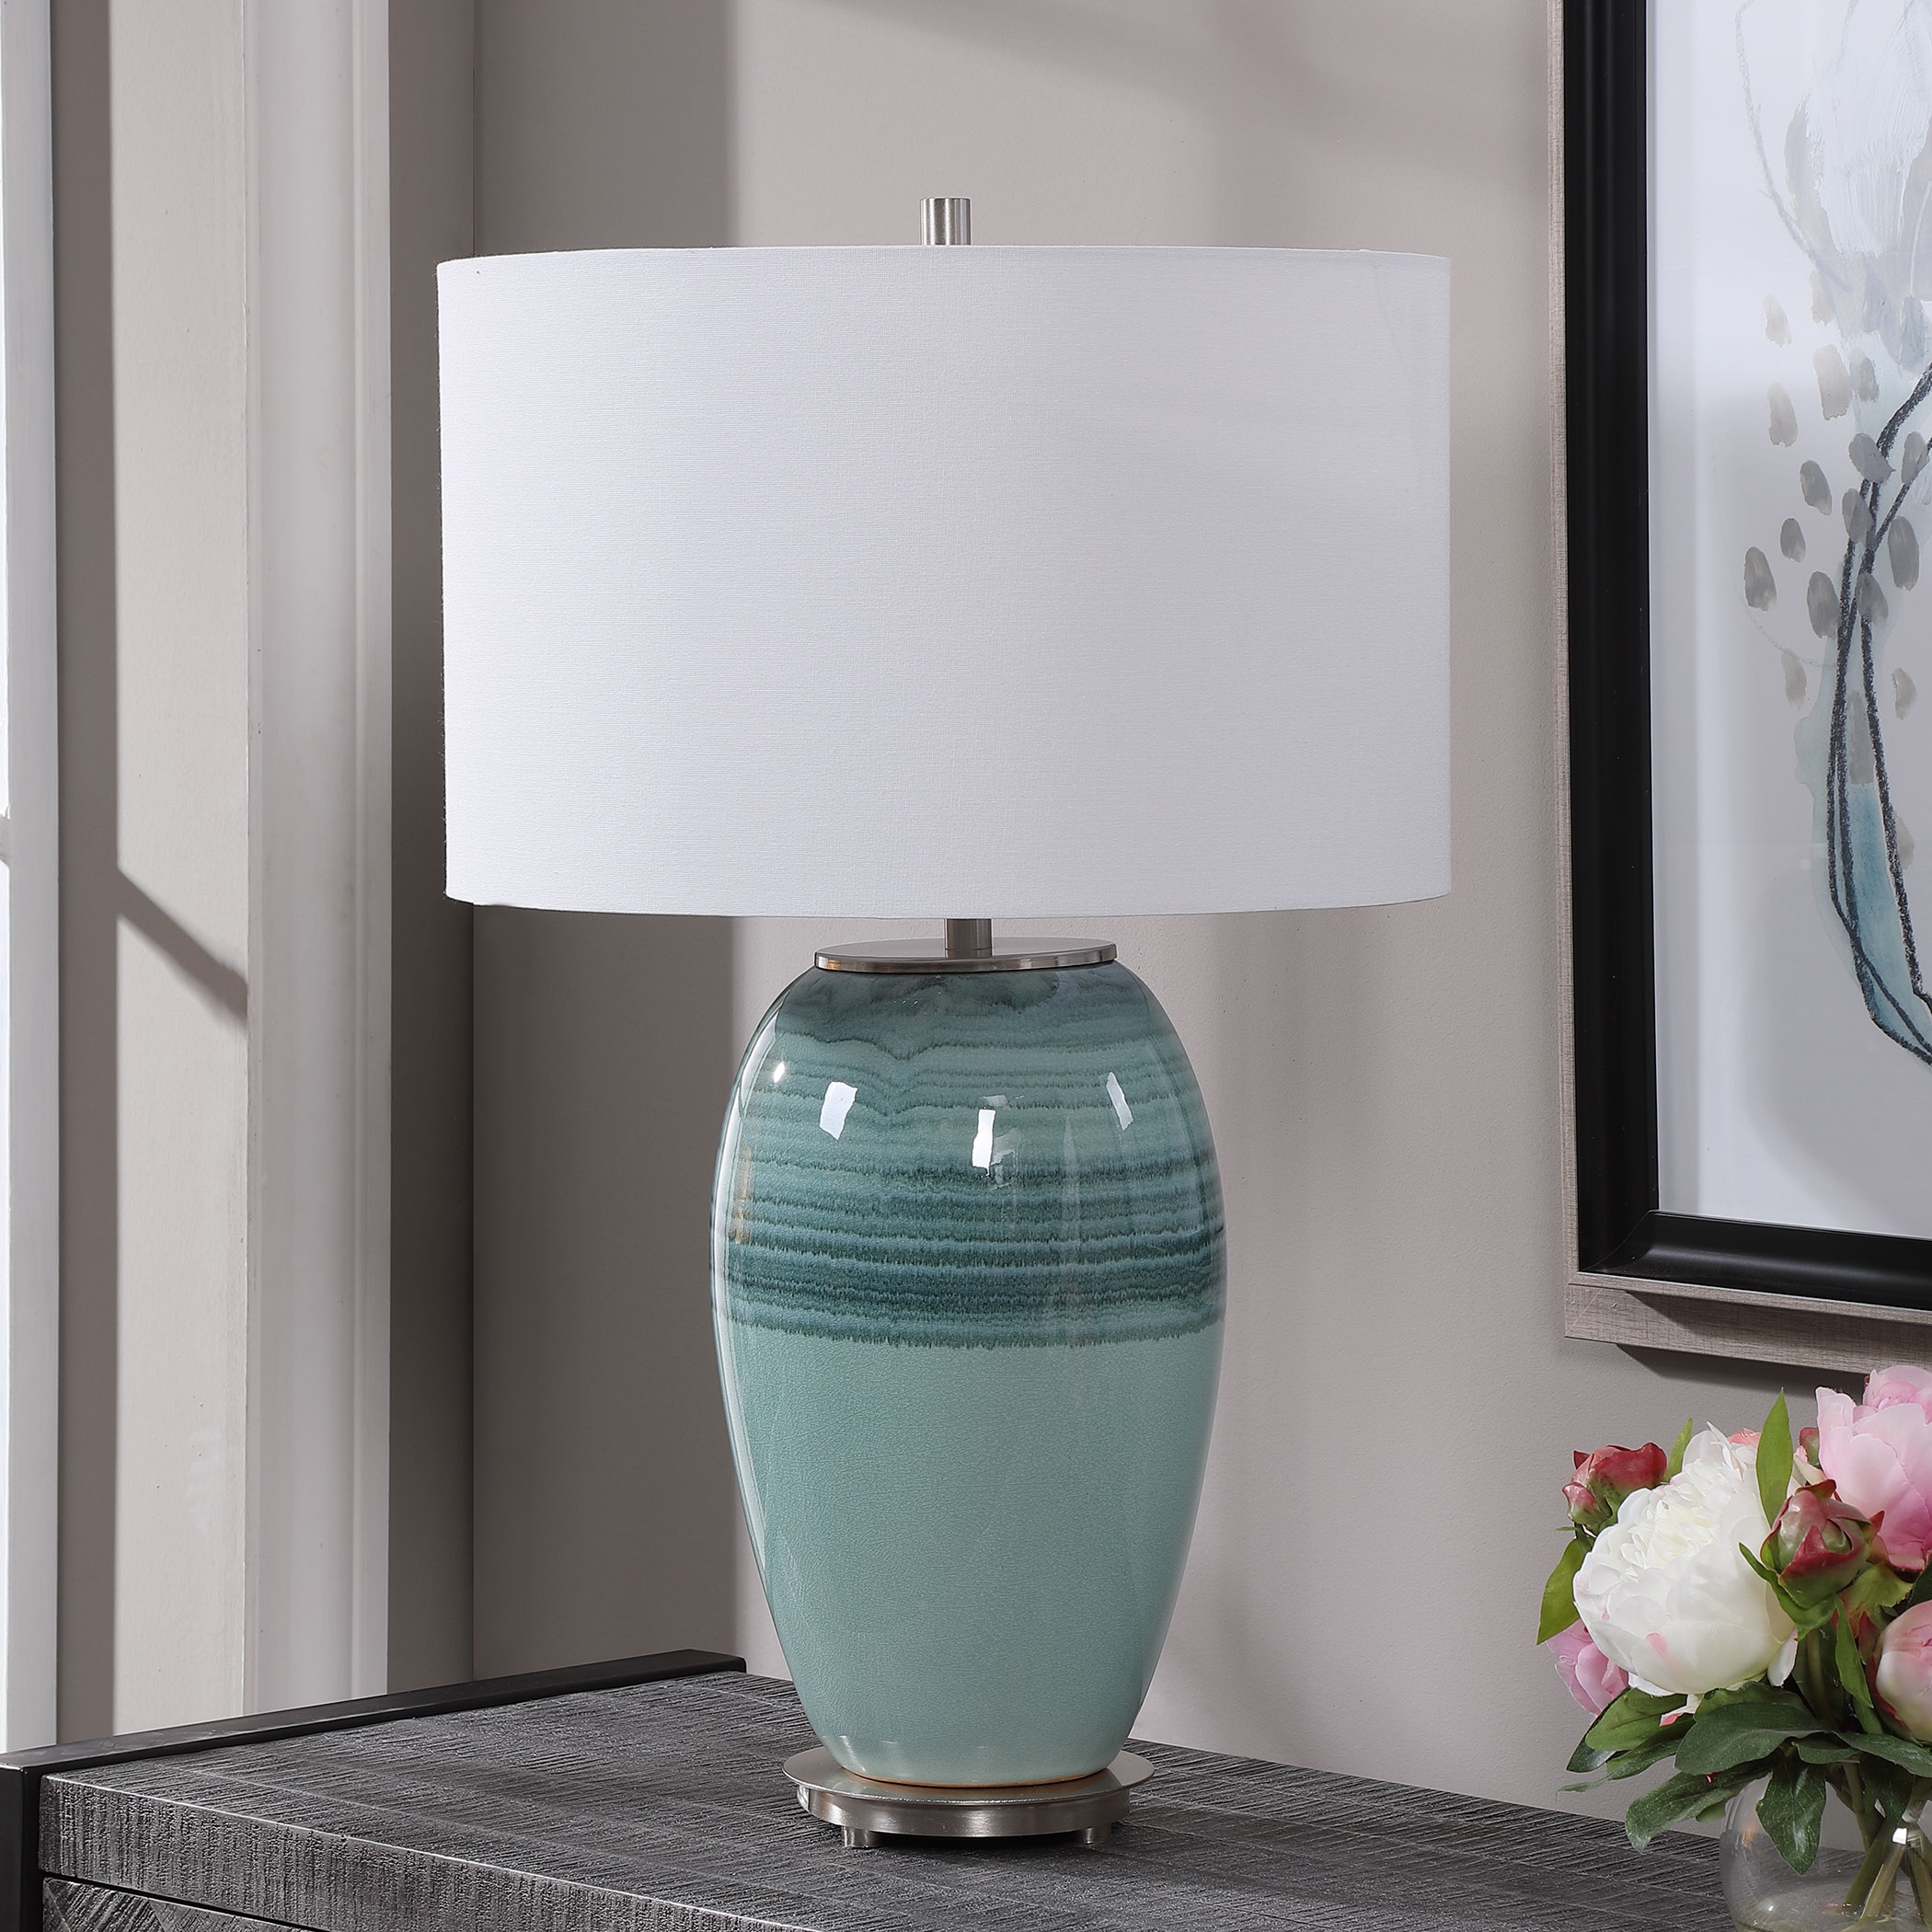 Caicos Teal Table Lamp - Image 2